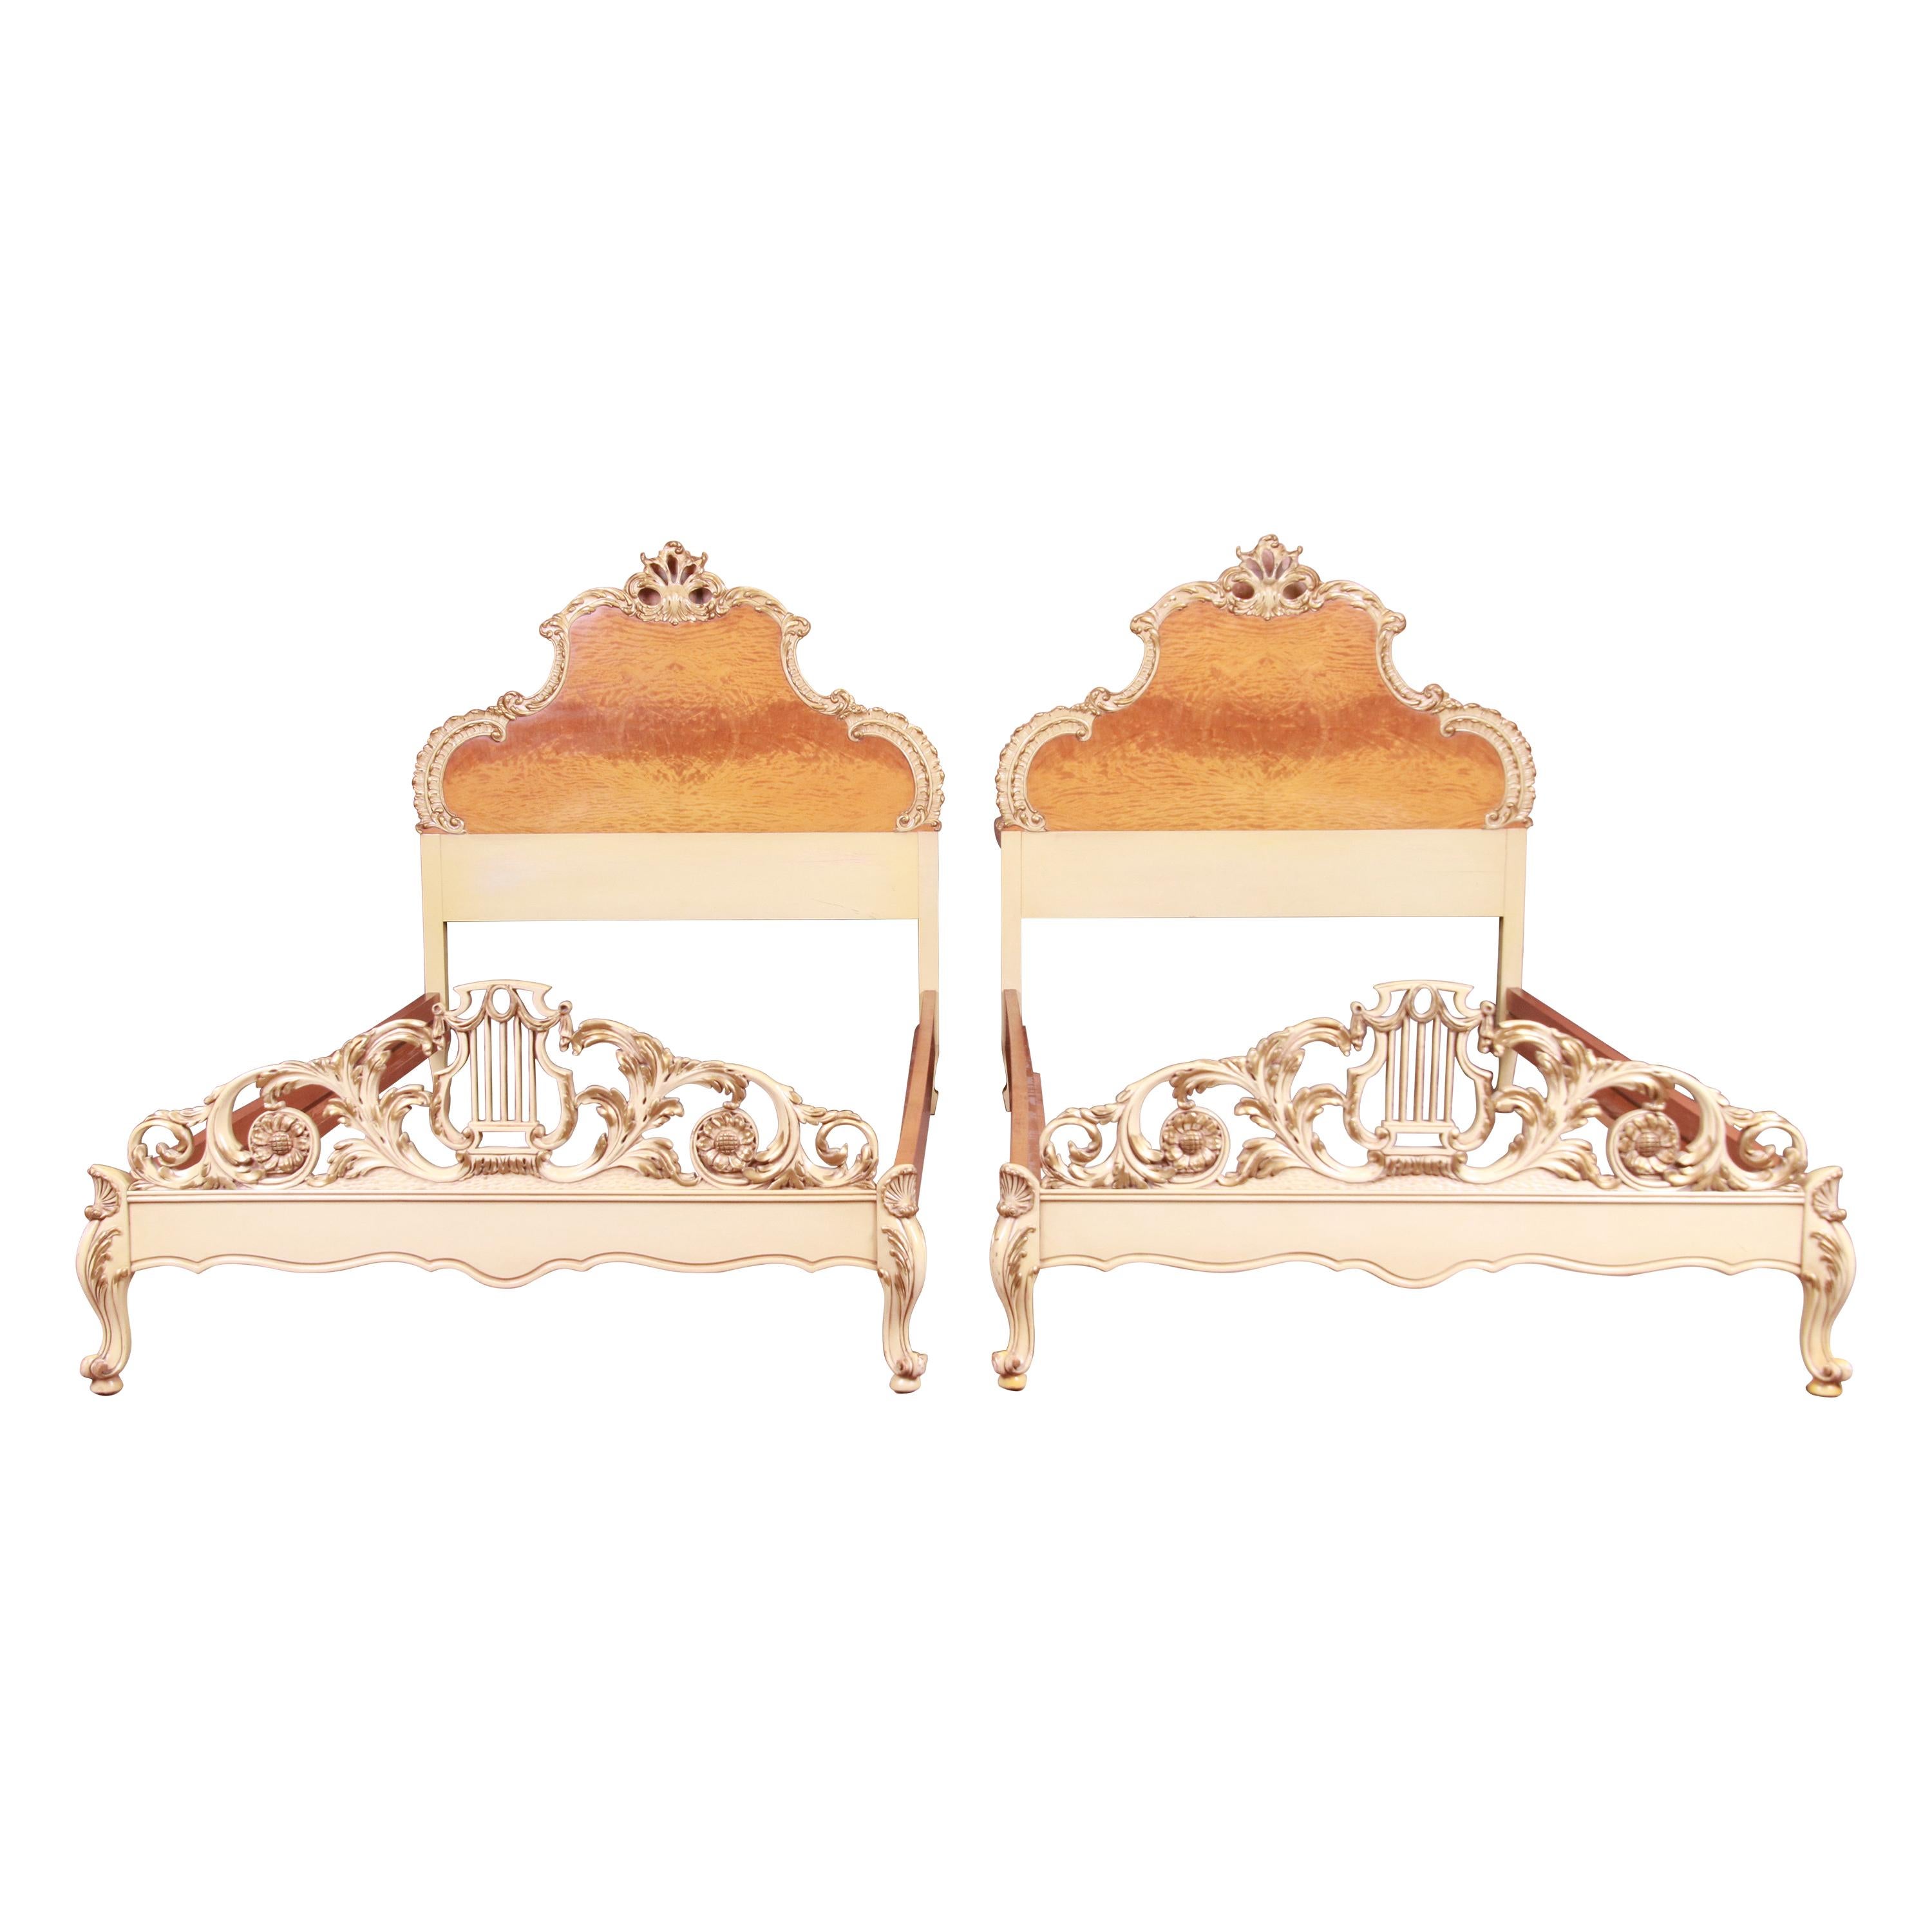 Romweber French Rococo Louis XV Burl Wood and Parcel Painted Twin Beds, Pair For Sale